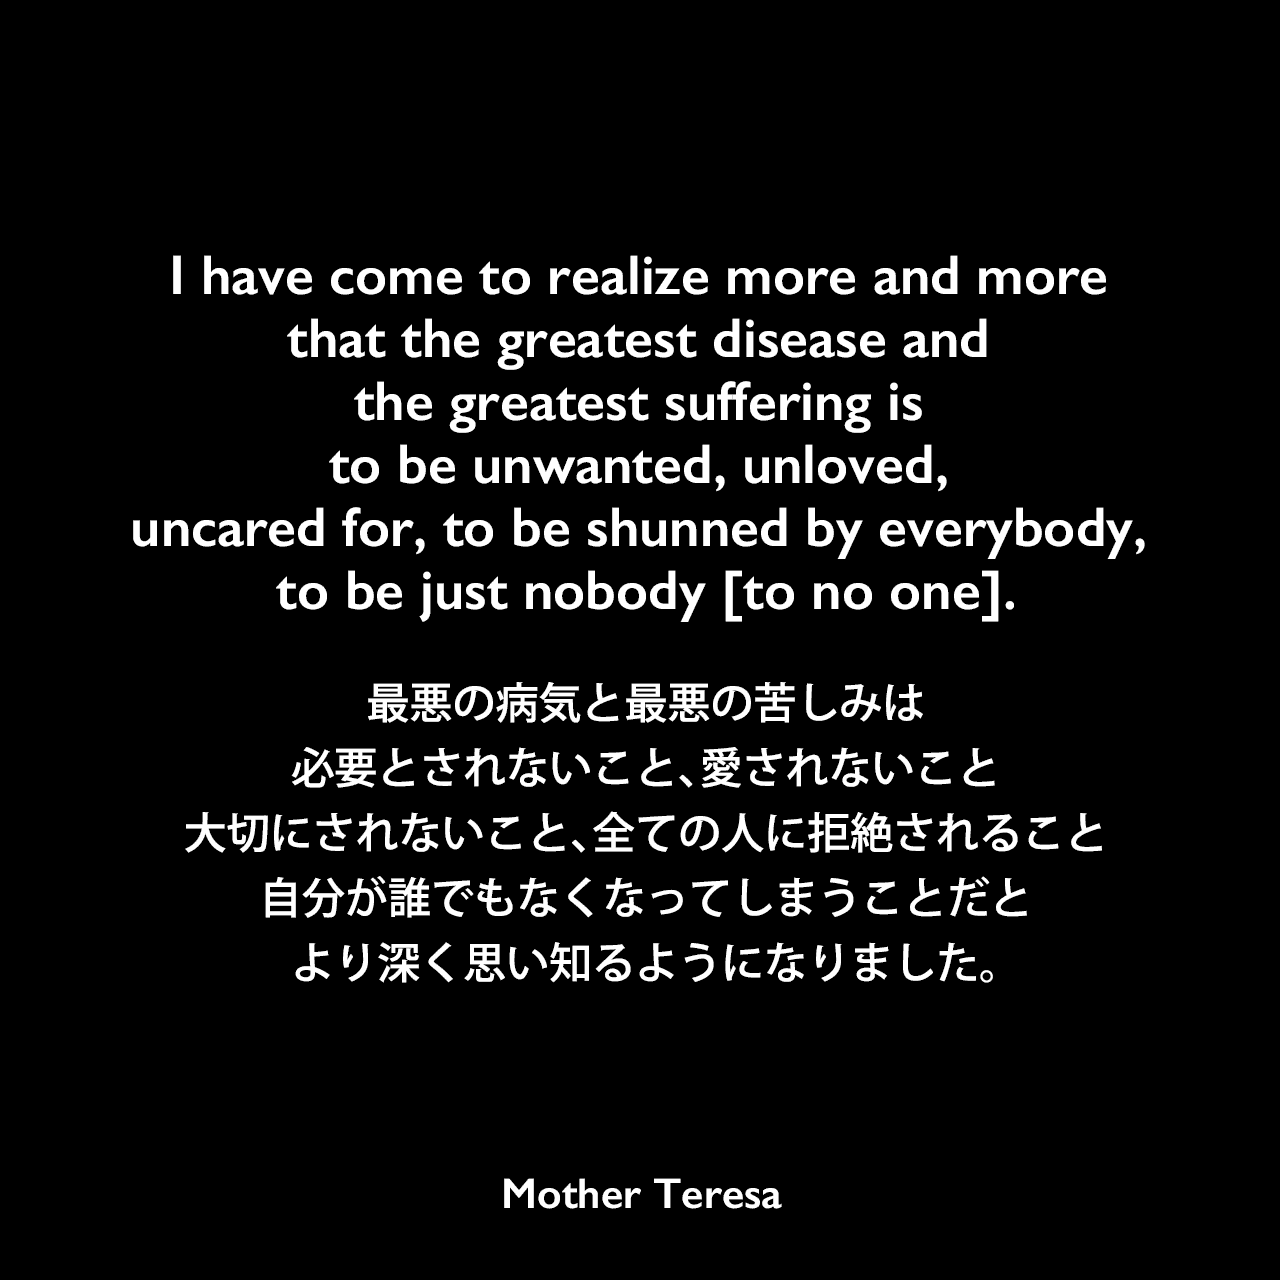 I have come to realize more and more that the greatest disease and the greatest suffering is to be unwanted, unloved, uncared for, to be shunned by everybody, to be just nobody [to no one].最悪の病気と最悪の苦しみは、必要とされないこと、愛されないこと、大切にされないこと、全ての人に拒絶されること、自分が誰でもなくなってしまうことだと、より深く思い知るようになりました。Mother Teresa